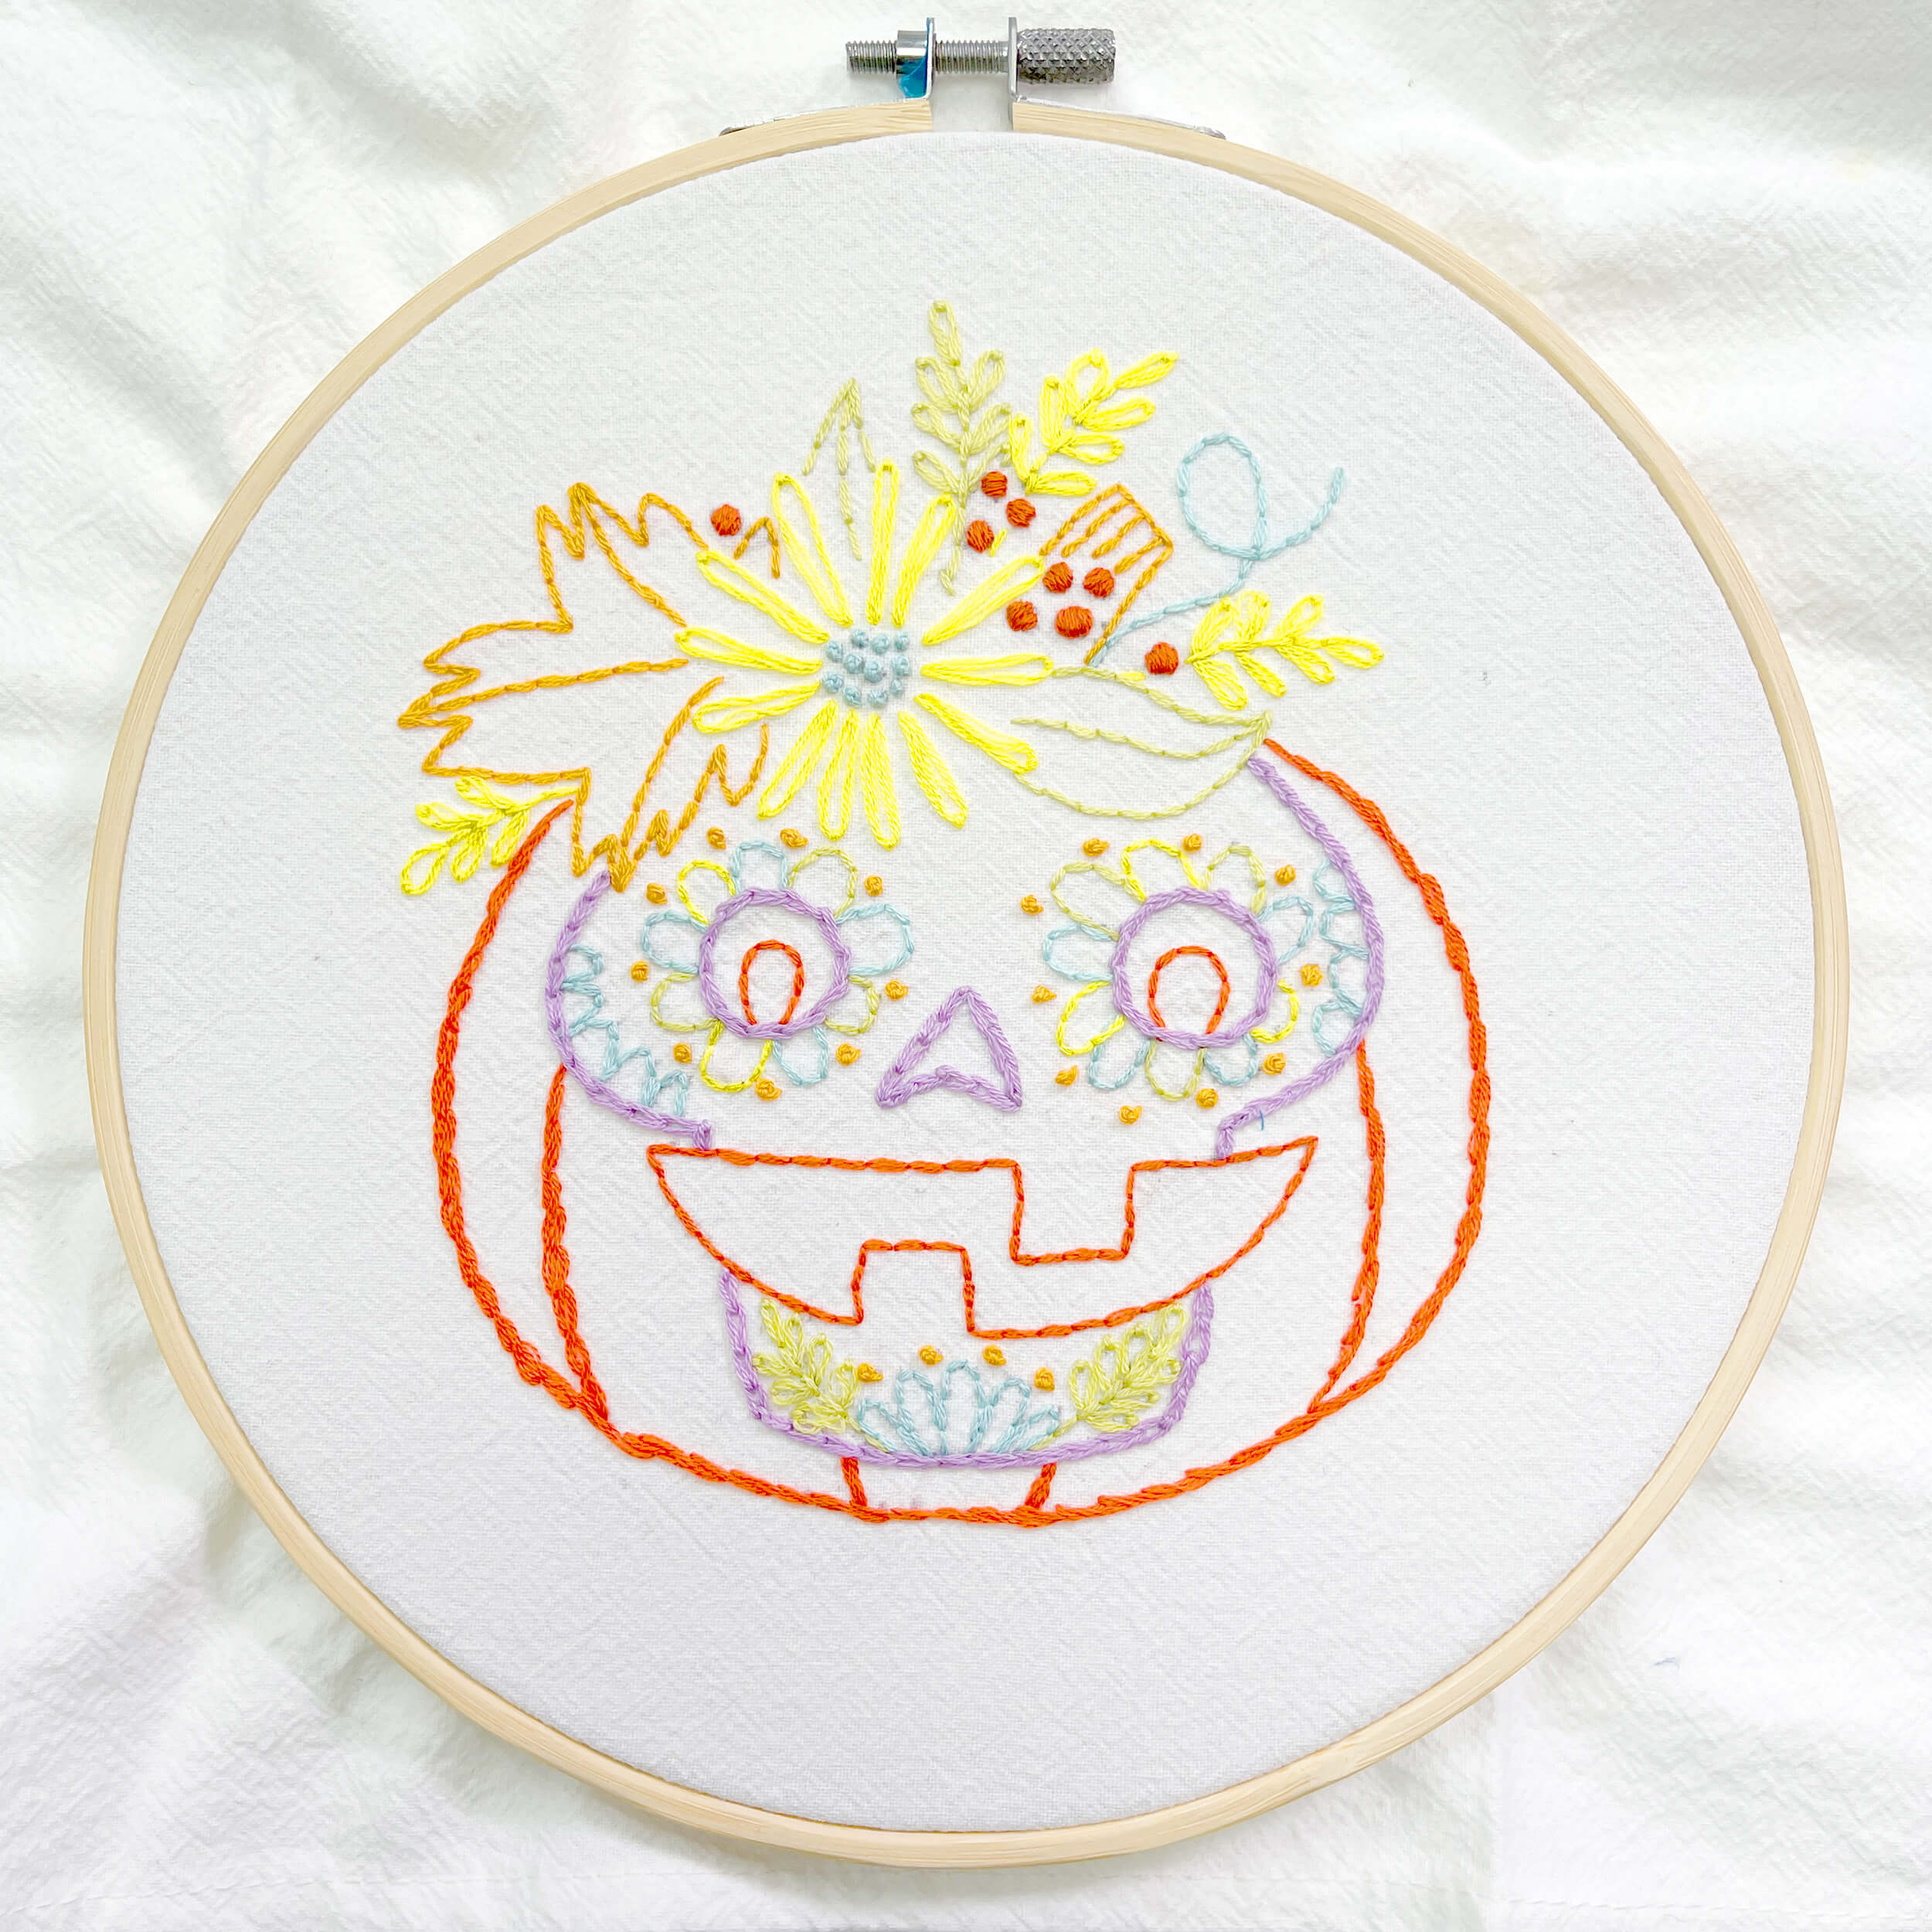 Finished pumpking embroidery with sugar skull face framed in a hoop